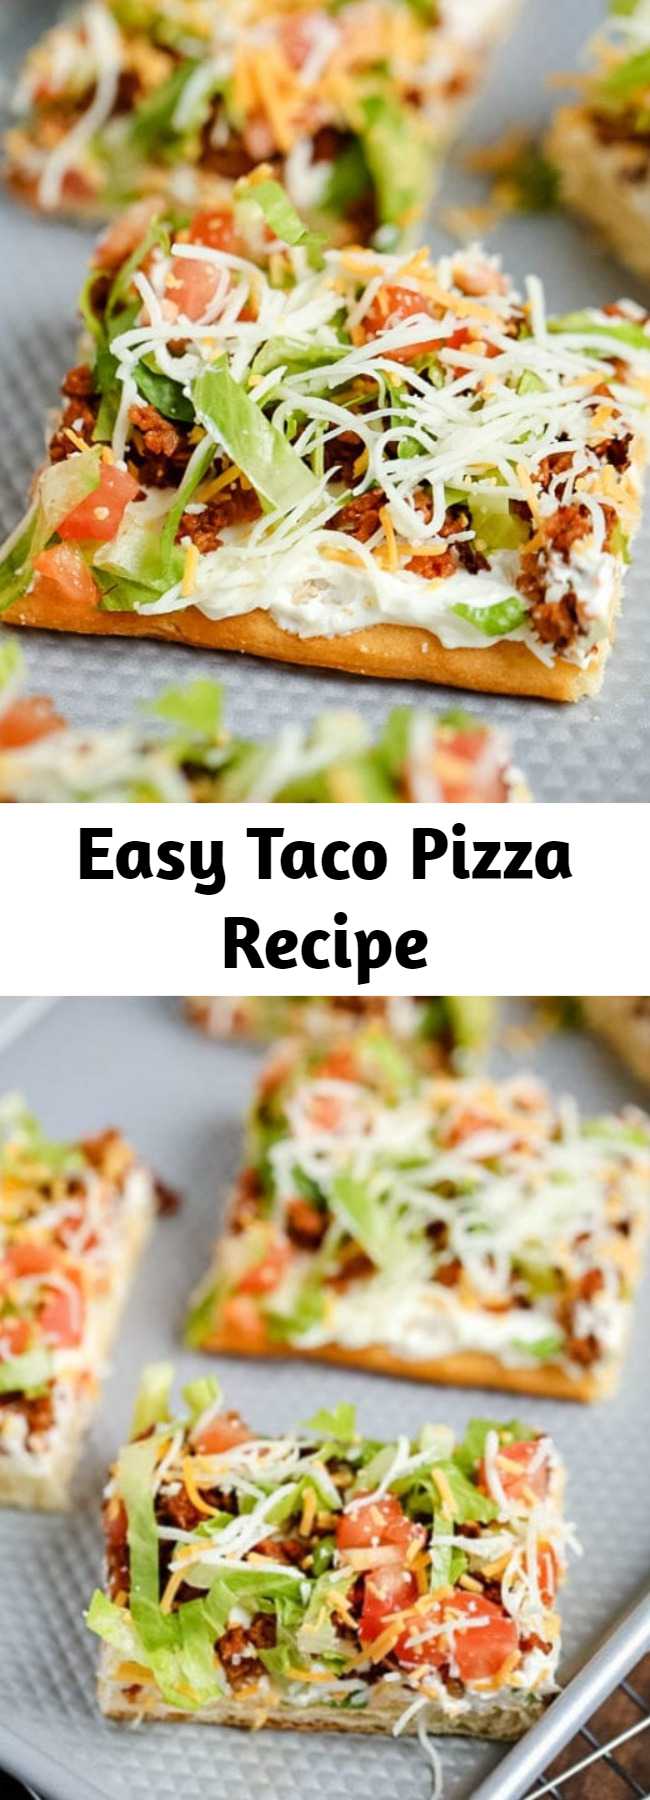 Easy Taco Pizza Recipe - A family-favorite dinner, this delicious taco pizza recipe is made with a crescent roll crust and simple ingredients. It’s quick and easy too; you can whip up this filling meal in 30 minutes or less!